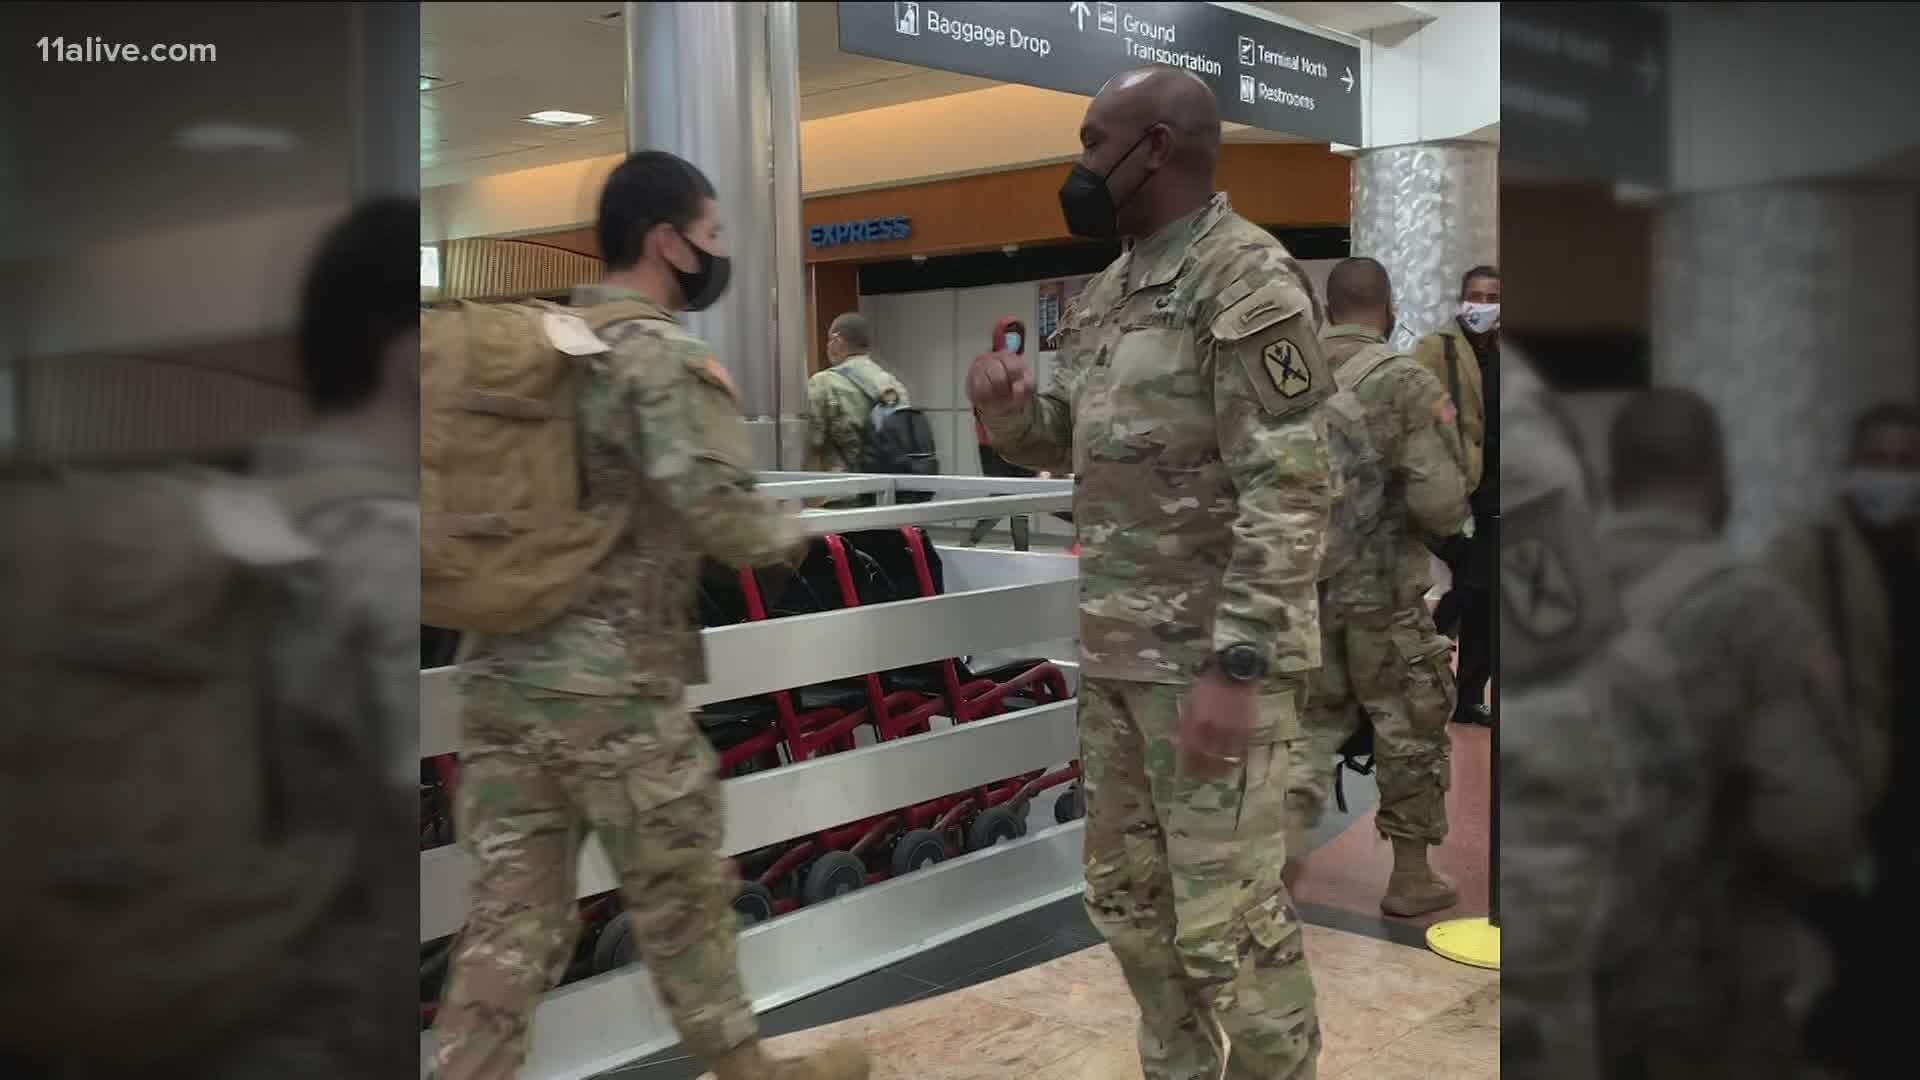 More than 7,500 soldiers started arriving at 3 in the morning, with the last group checking in 10 hours later.